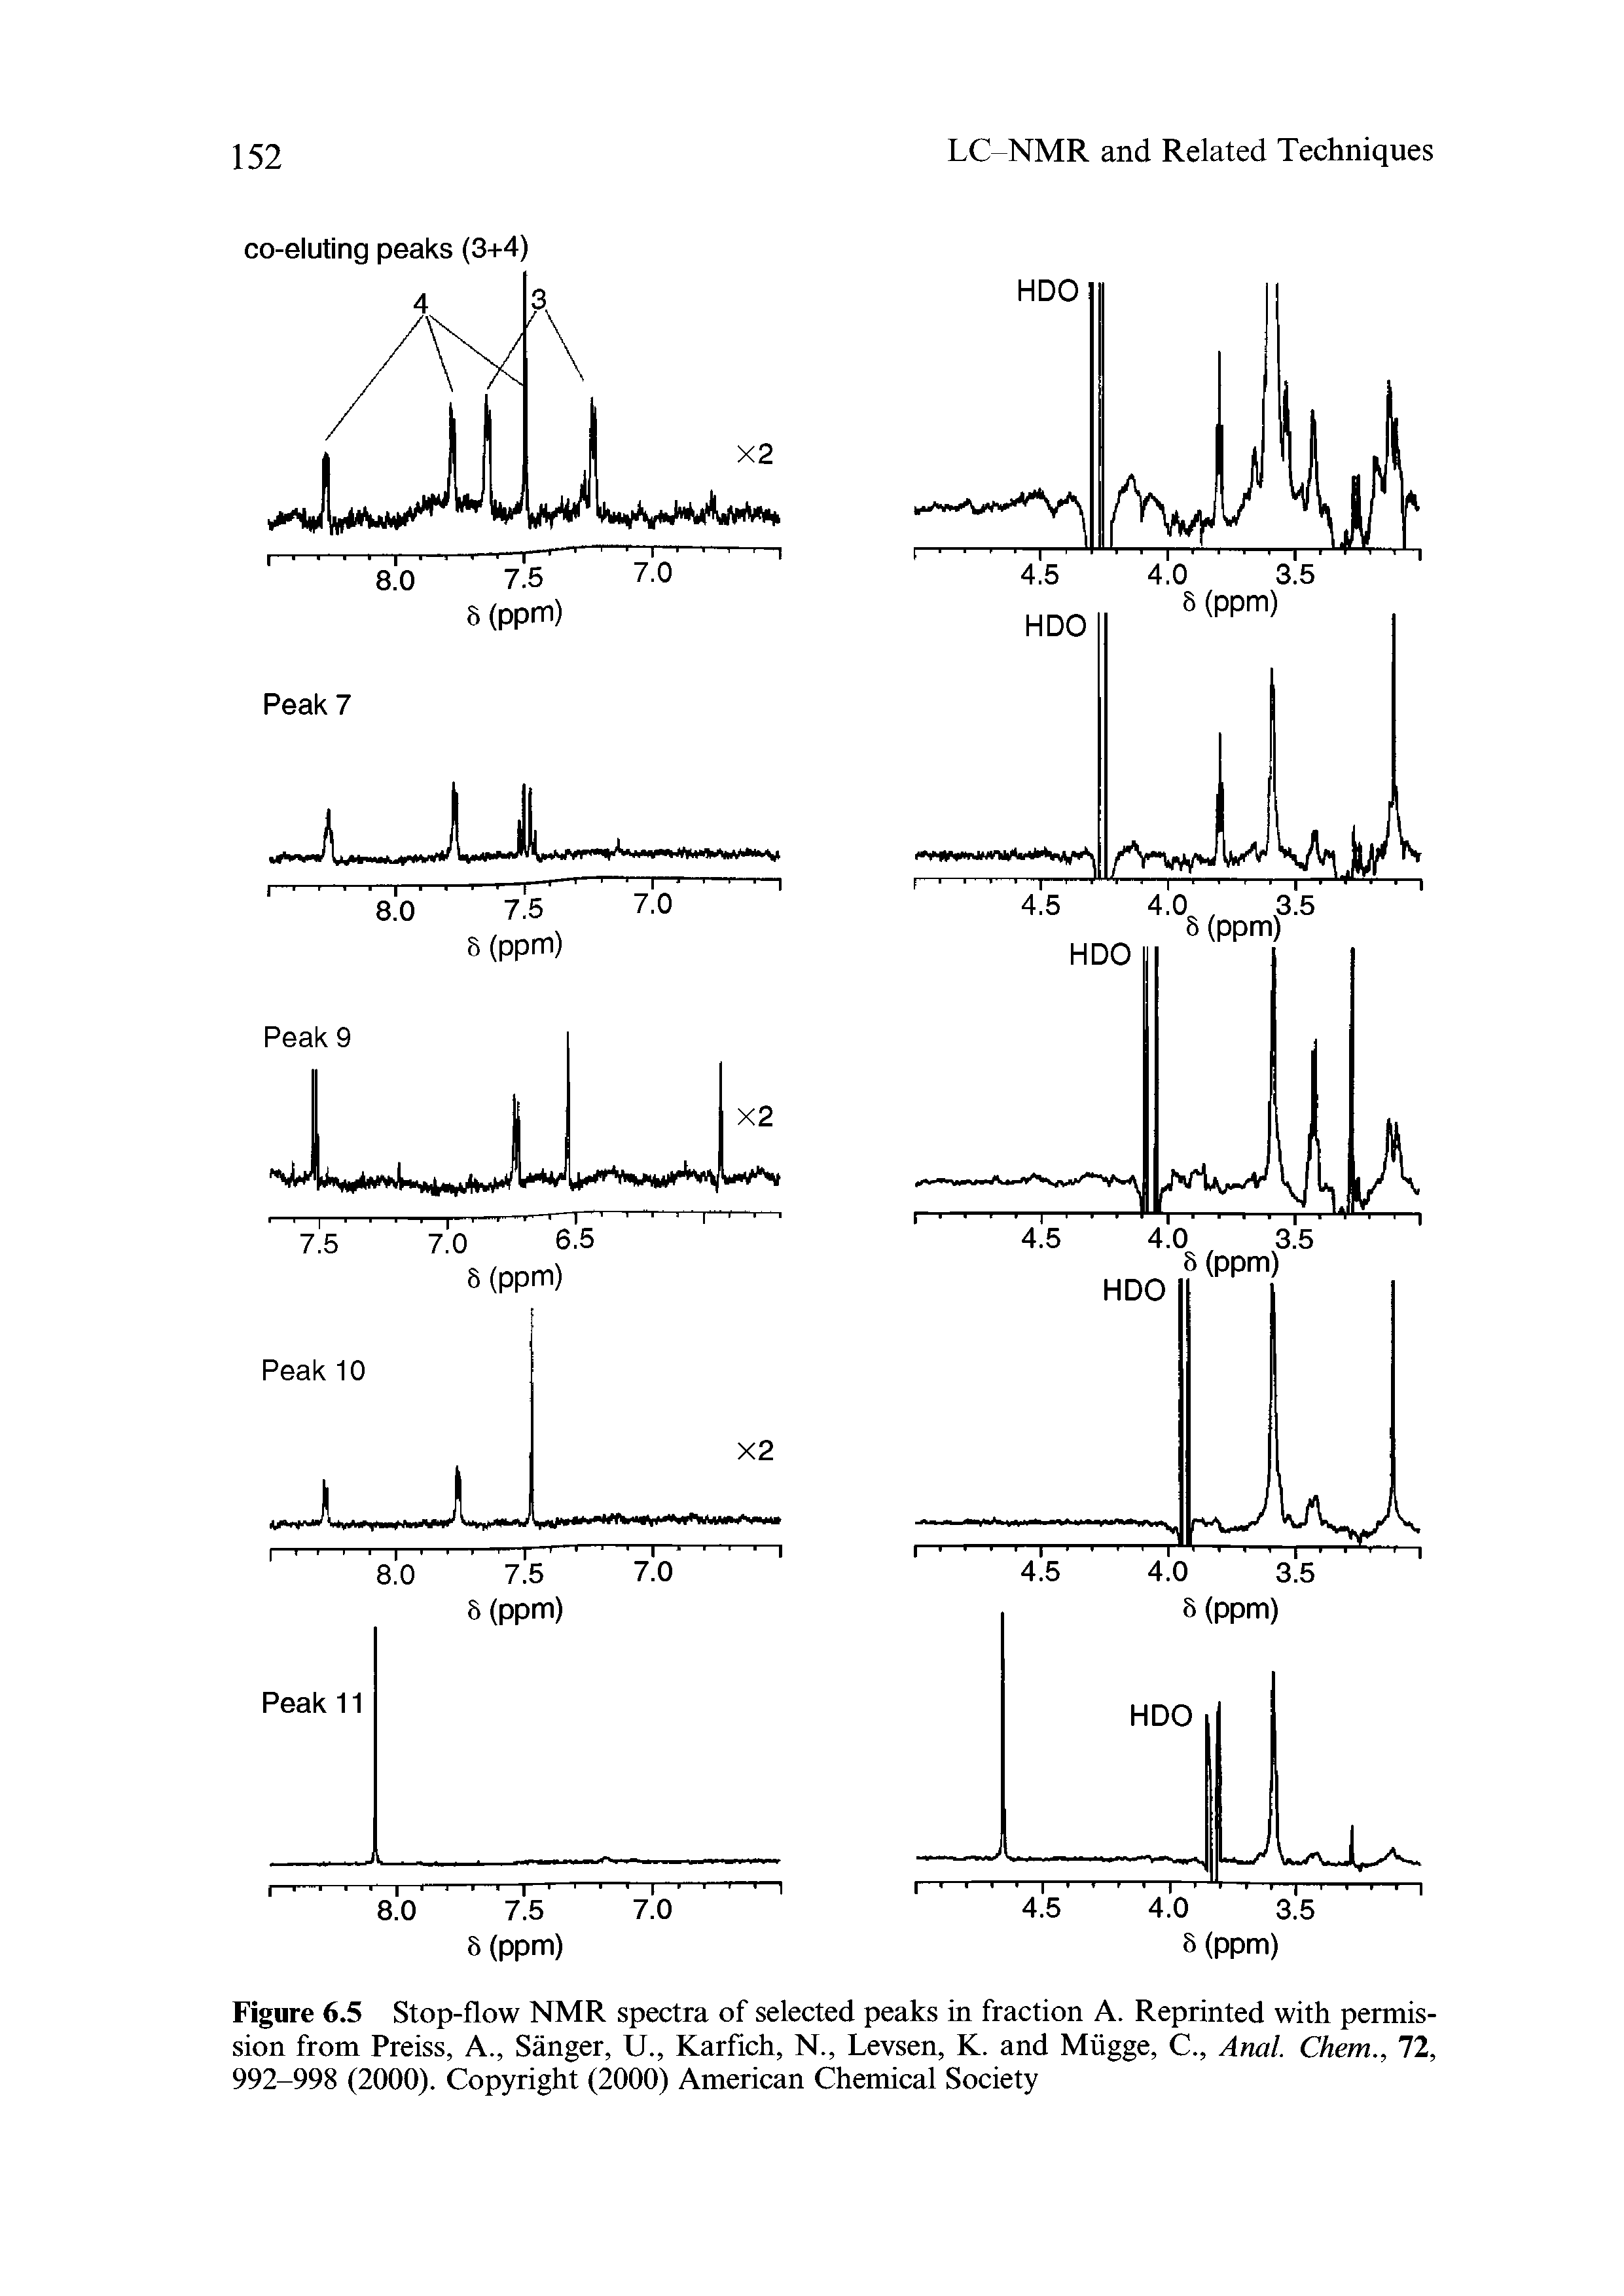 Figure 6.5 Stop-flow NMR spectra of selected peaks in fraction A. Reprinted with permission from Preiss, A., Sanger, U., Karfich, N., Levsen, K. and Miigge, C., Anal. Chem., 72, 992-998 (2000). Copyright (2000) American Chemical Society...